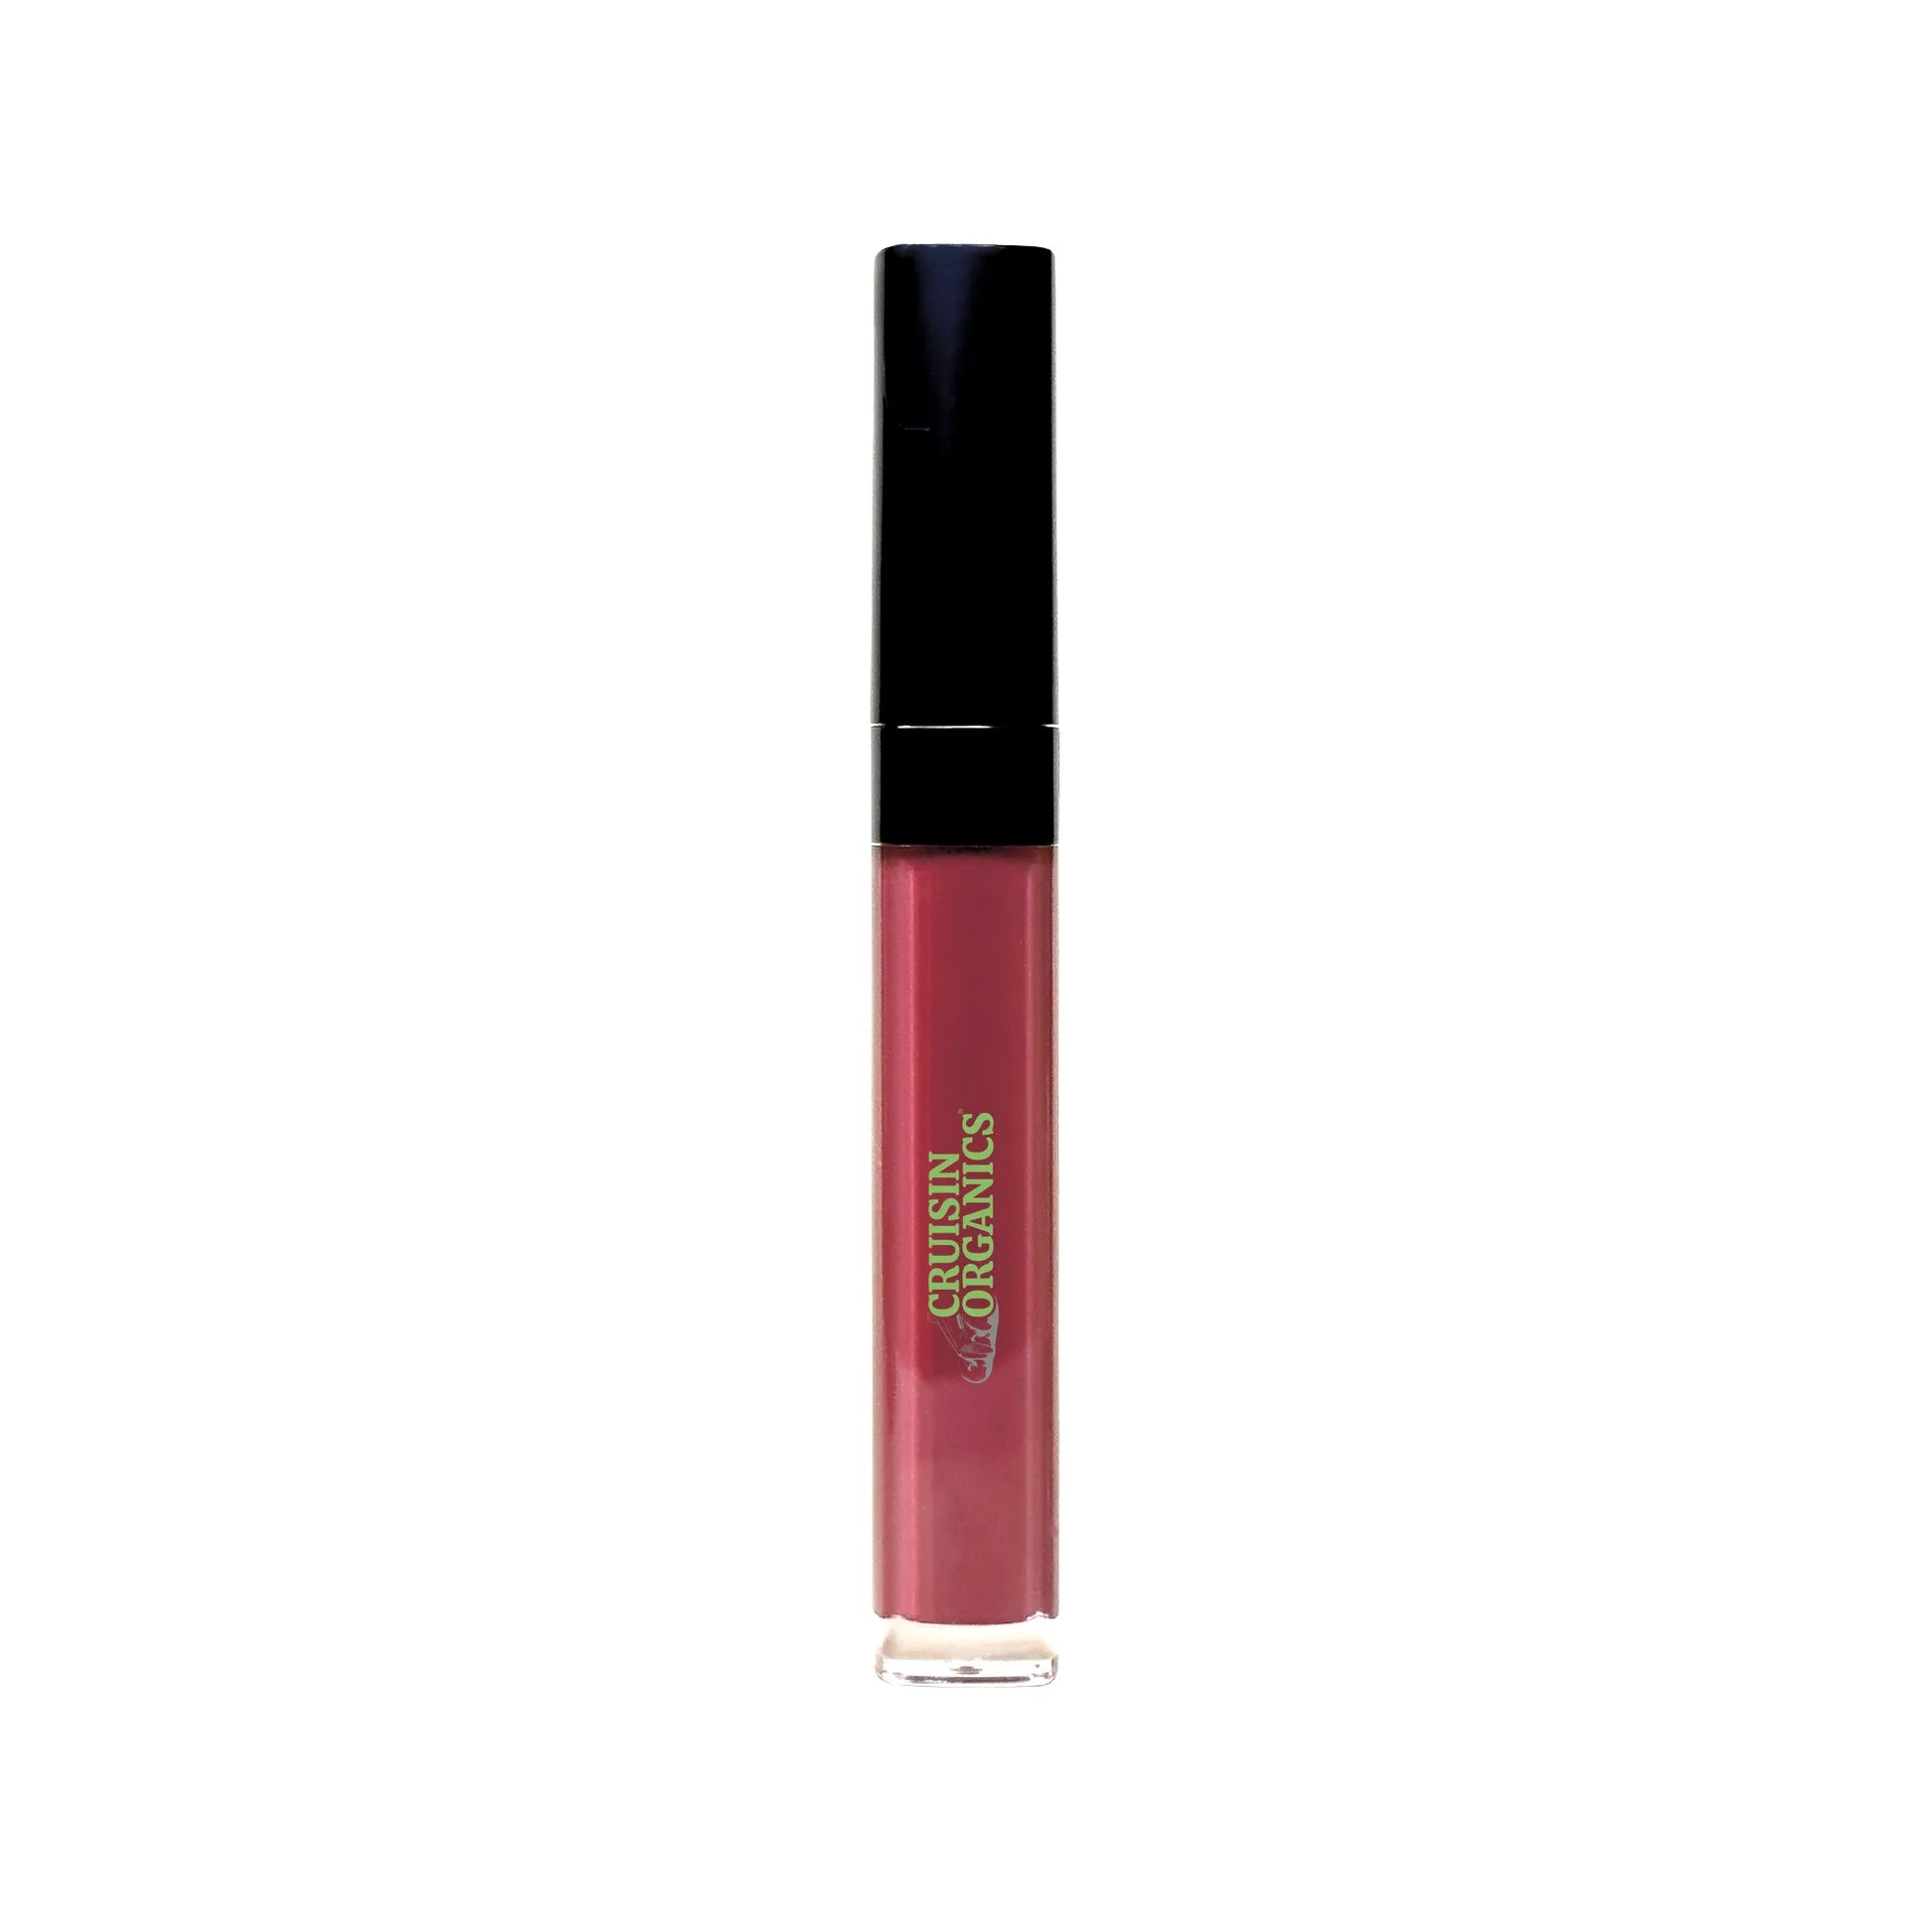 Integrate this cushiony Lip Oil into your makeup regimen. Beyond providing a delicate shimmer with medium coverage, combines a blend of oils, vitamins A and D to offer ultimate hydration and volumizing effects. The infusion of castor oil, abundant in natural omega fatty acids, delicately hydrates and plumps your lips to their fullest. Rest assured Lip Oil is long-wearing—delivering softening, plumping, and conditioning benefits that last throughout the entire day. Nourishment with one sweep Lip Oil!